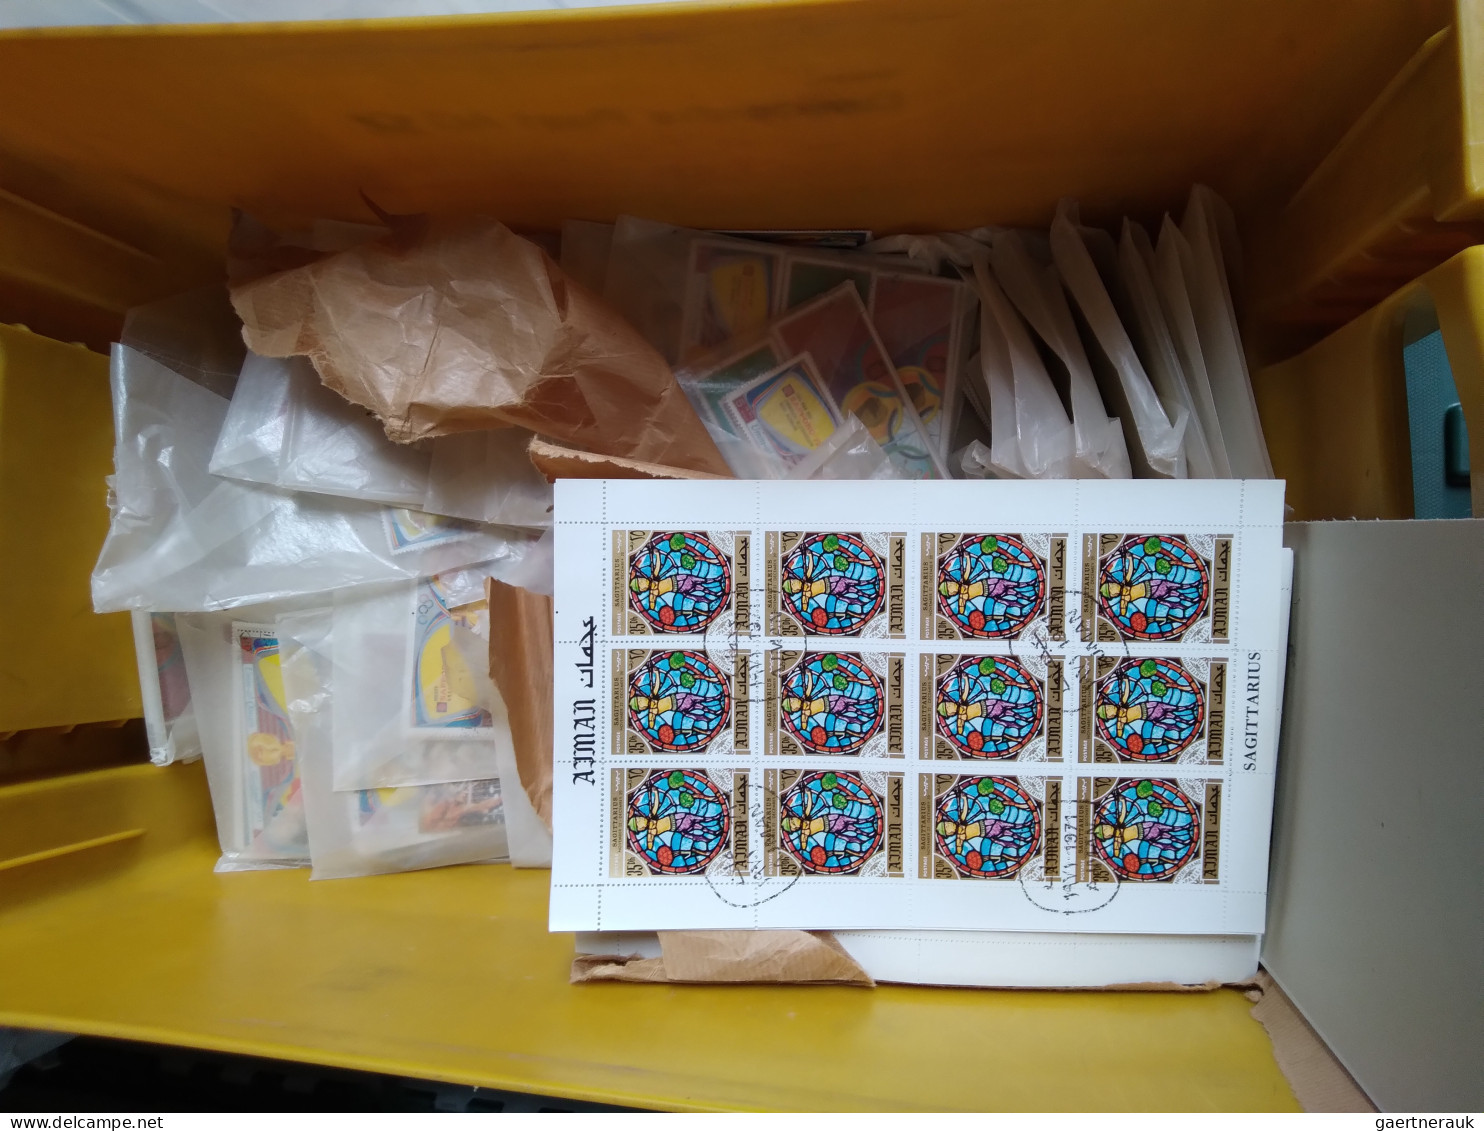 Middle East: "ARABIC WORLD" huge stock of stamps and a lot of Epreuves, proofs,